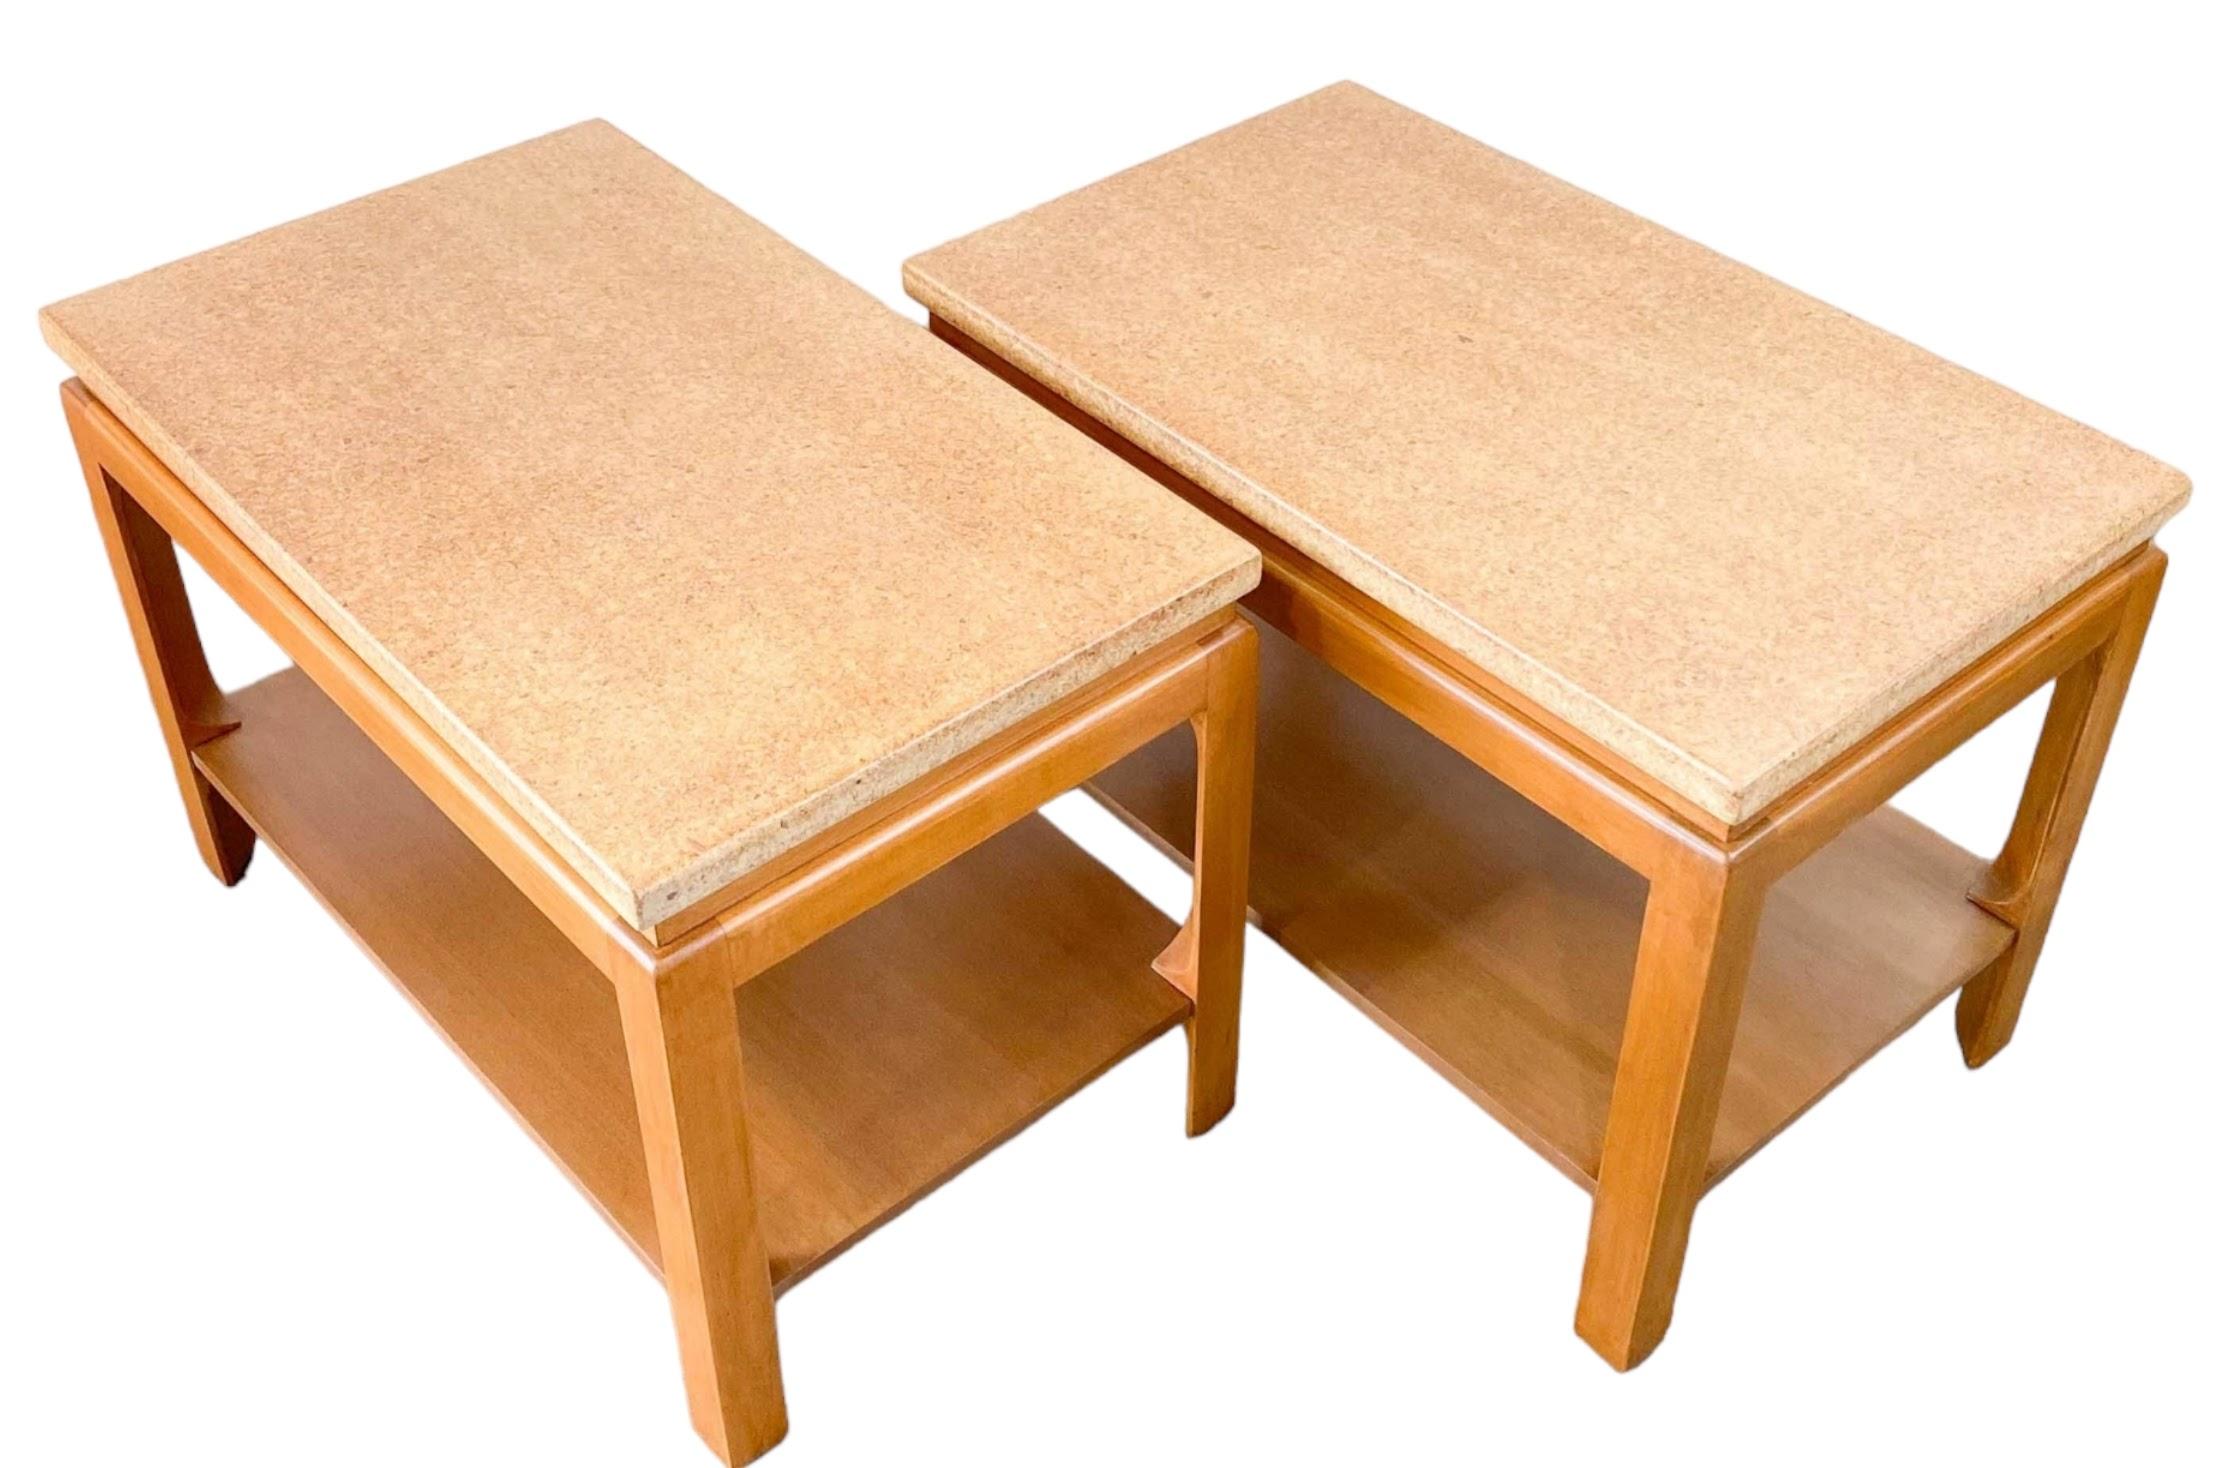 Pair of Paul T. Frankl for Johnson Cork Top Two Tier Side or End Tables, 1950s For Sale 4